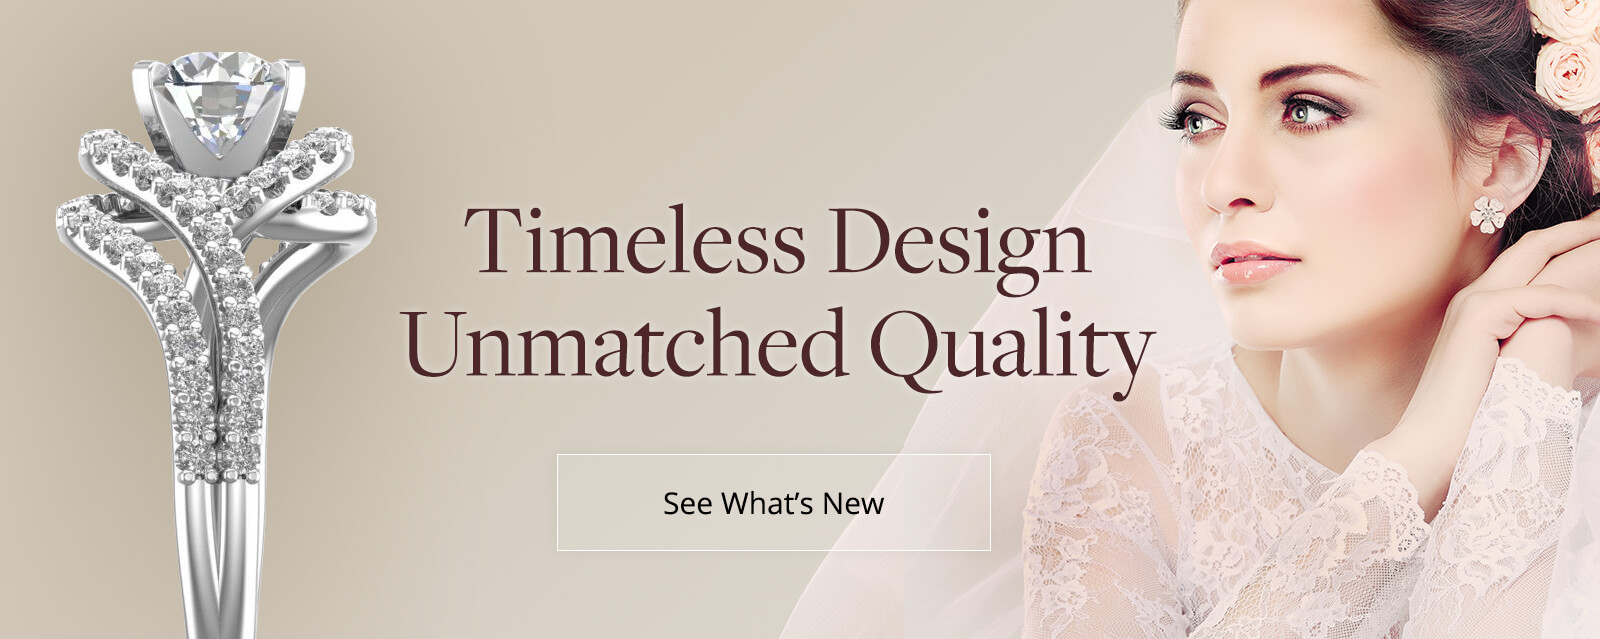 Timeless Design - Unmatched Quality